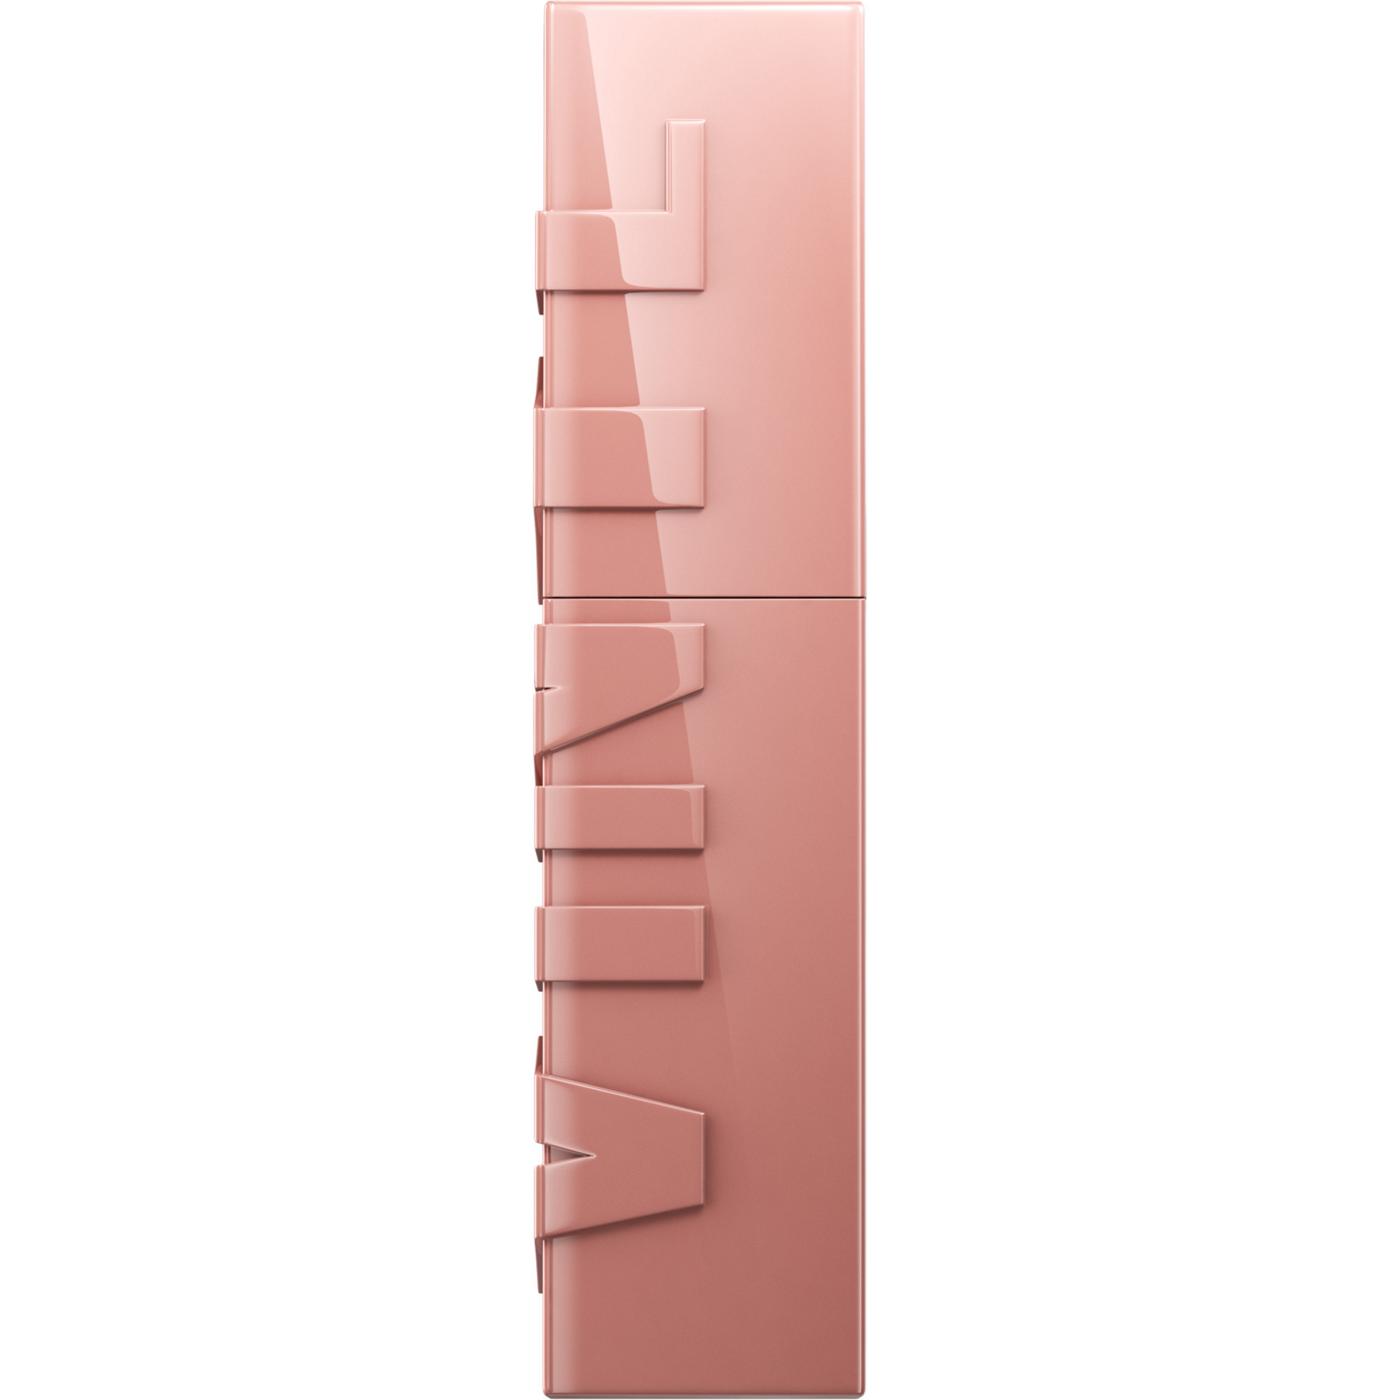 Maybelline Super Stay Vinyl Ink Liquid Lipstick - Captivated; image 10 of 10